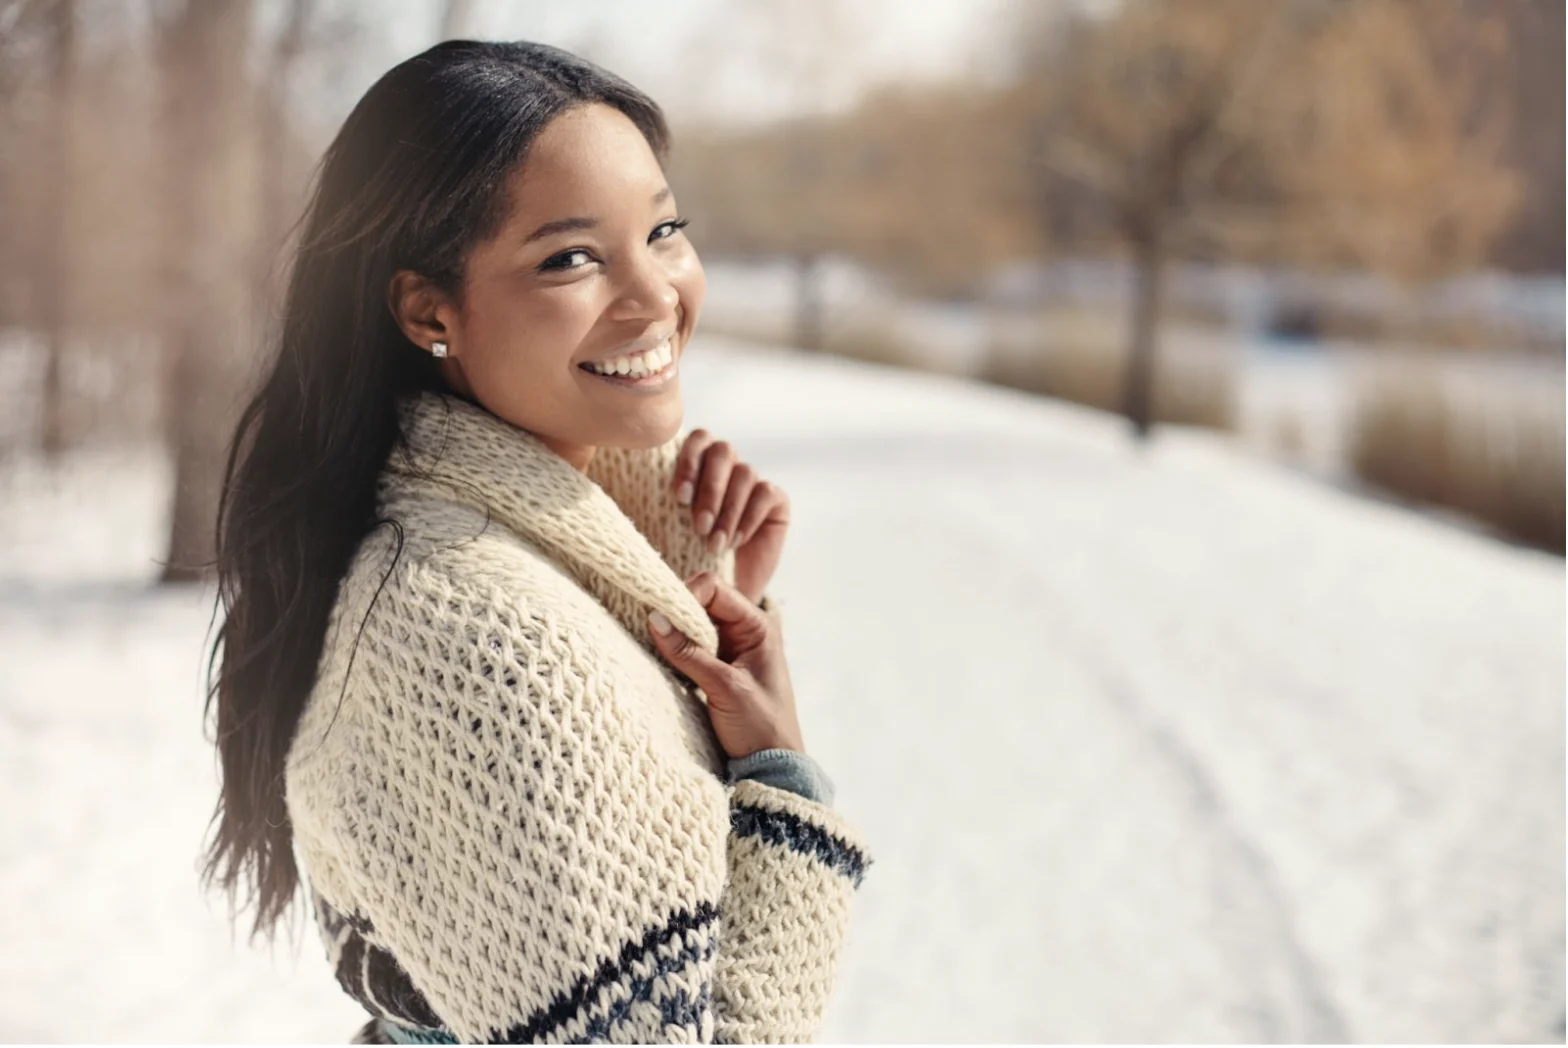 Getty Images: Healthy hair during winter requires the right products and hair care routine